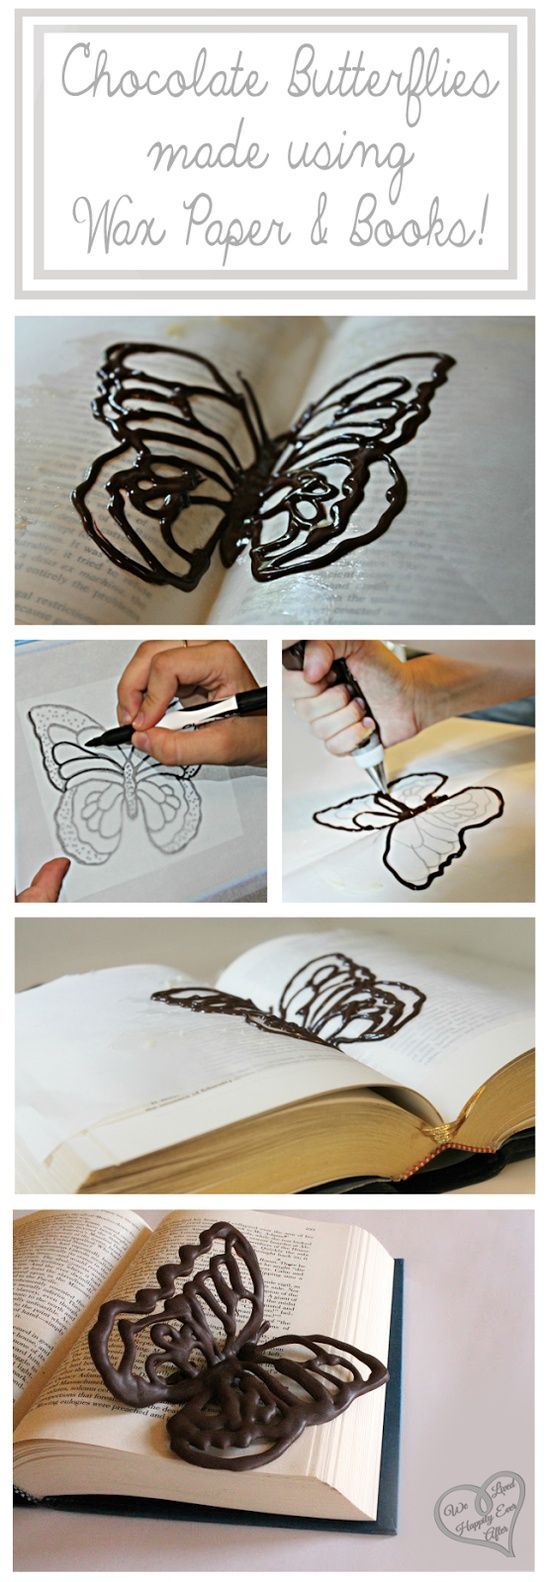 Make Chocolate Butterflies Using Wax Paper and Books! The Books give it a realistic pose. The Template/Pat